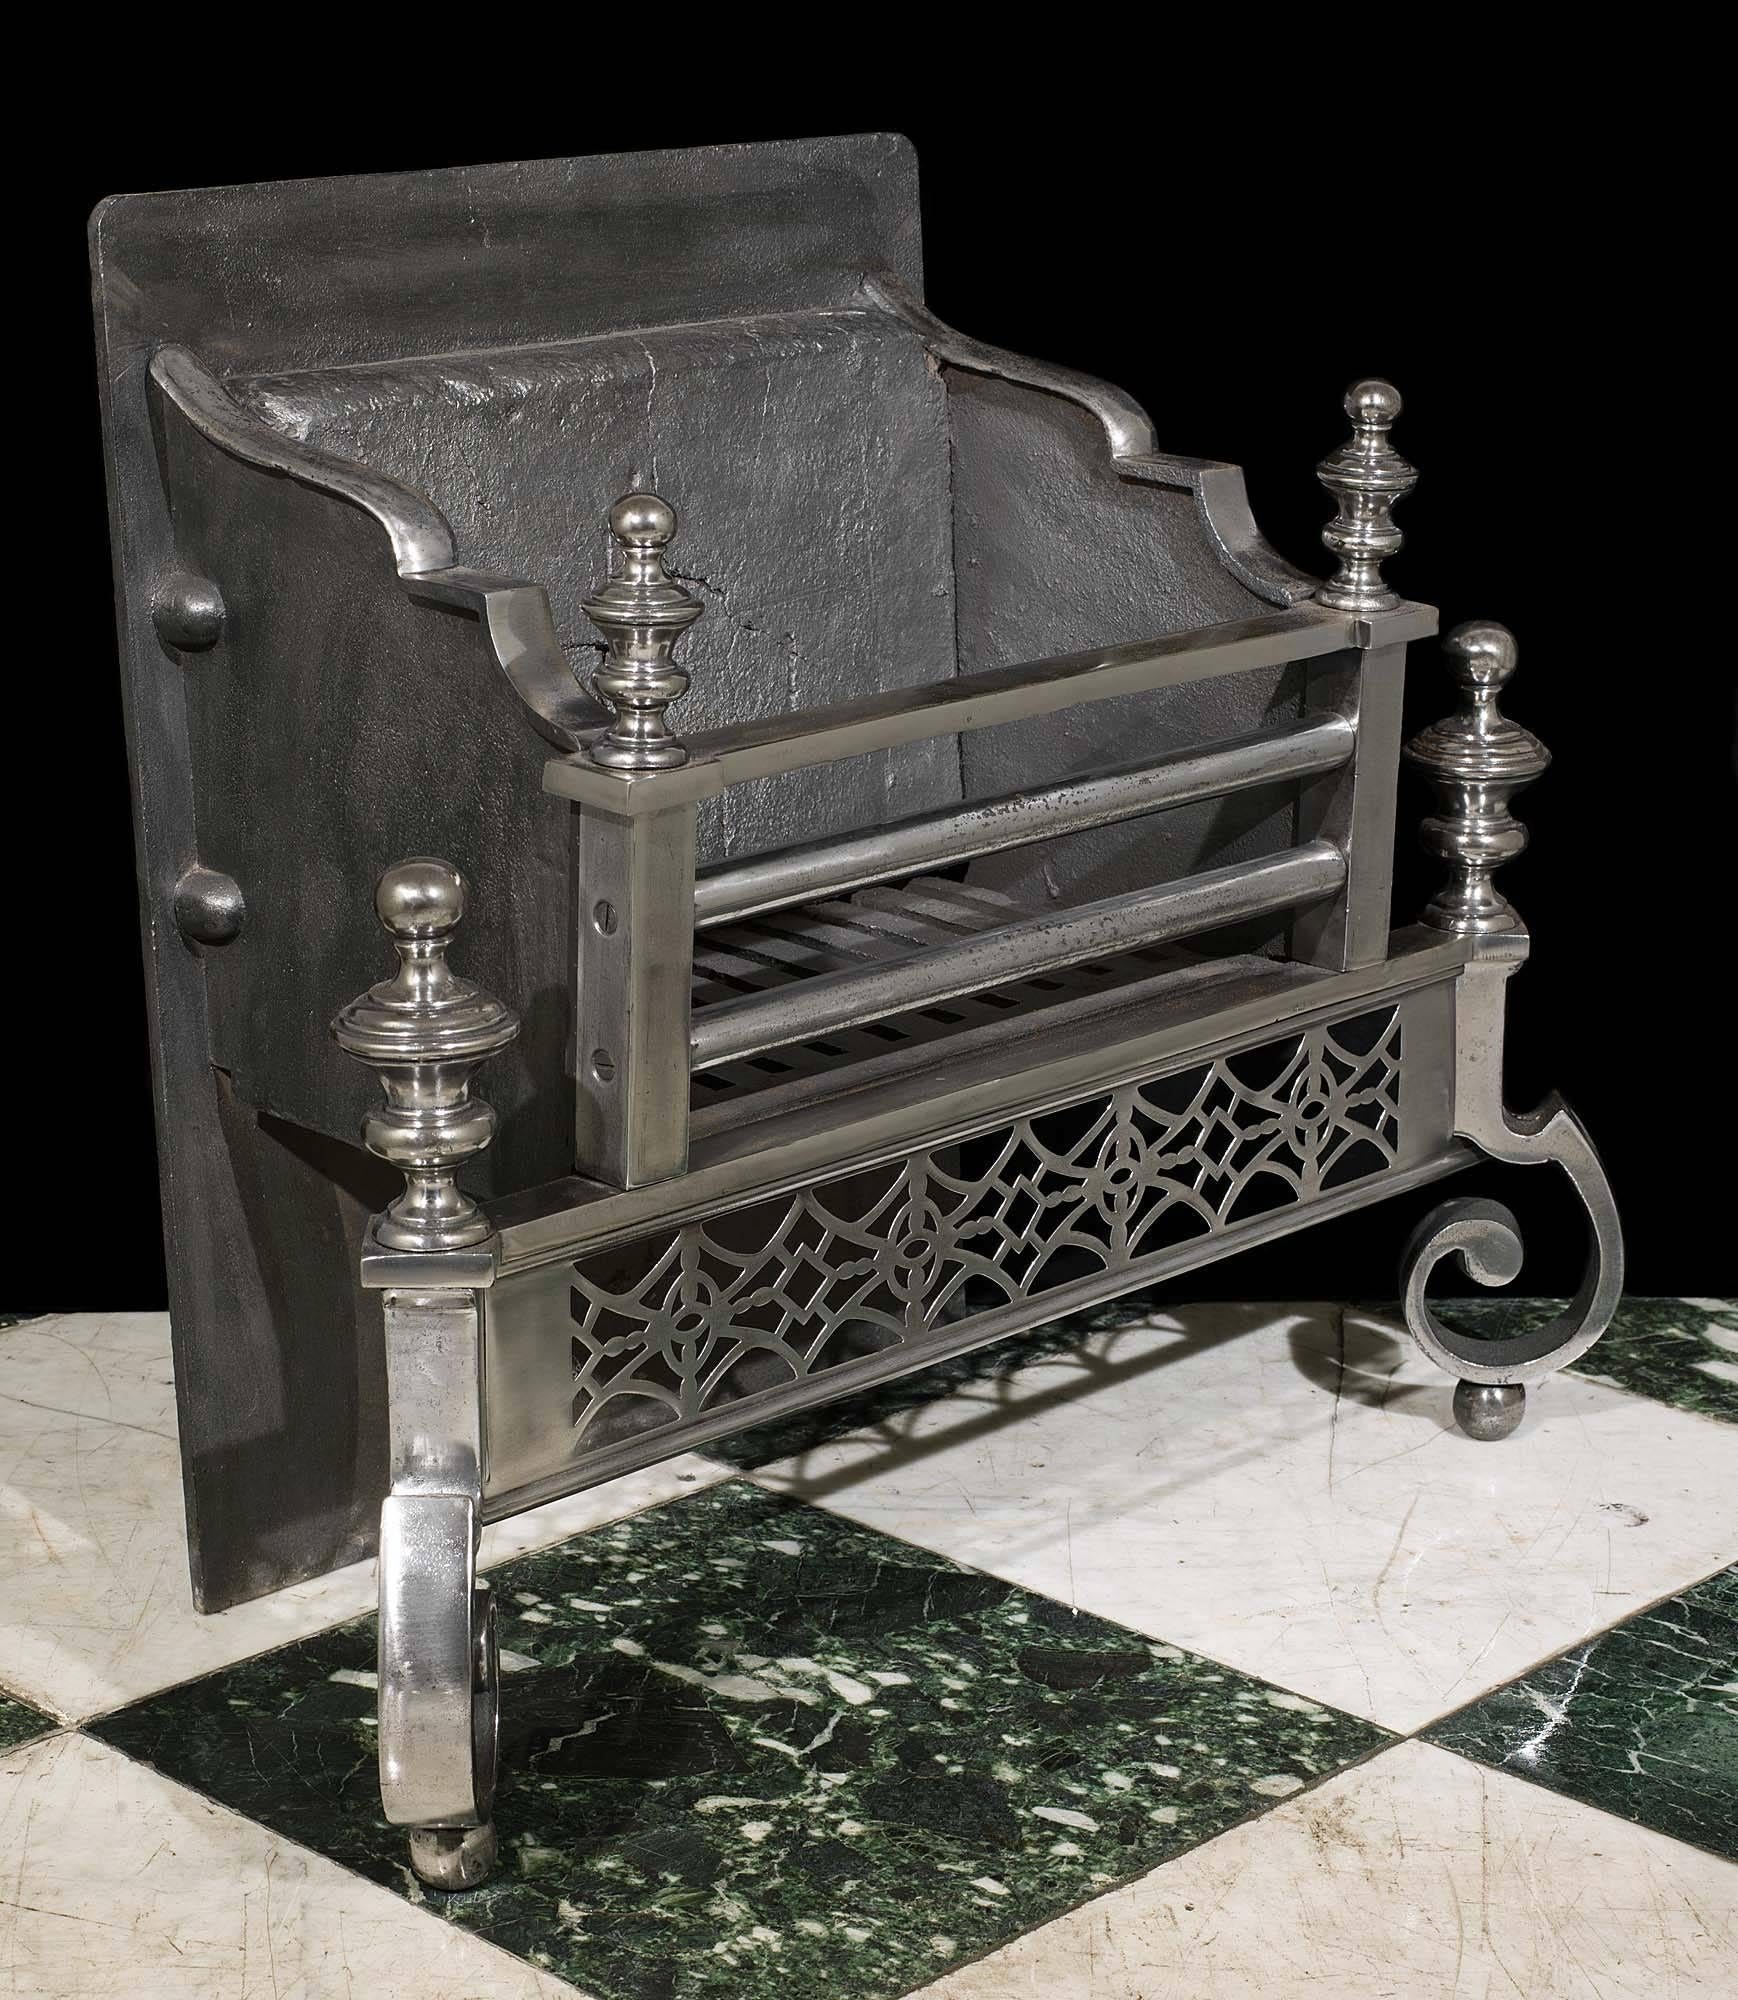 A smart polished steel three barred Georgian style antique fire basket with four mounted knopped finials, a diamond design pierced apron and supported on a pair of robust scrolled legs,

English, late 19th century. 

(Prices + vat in EU zone).